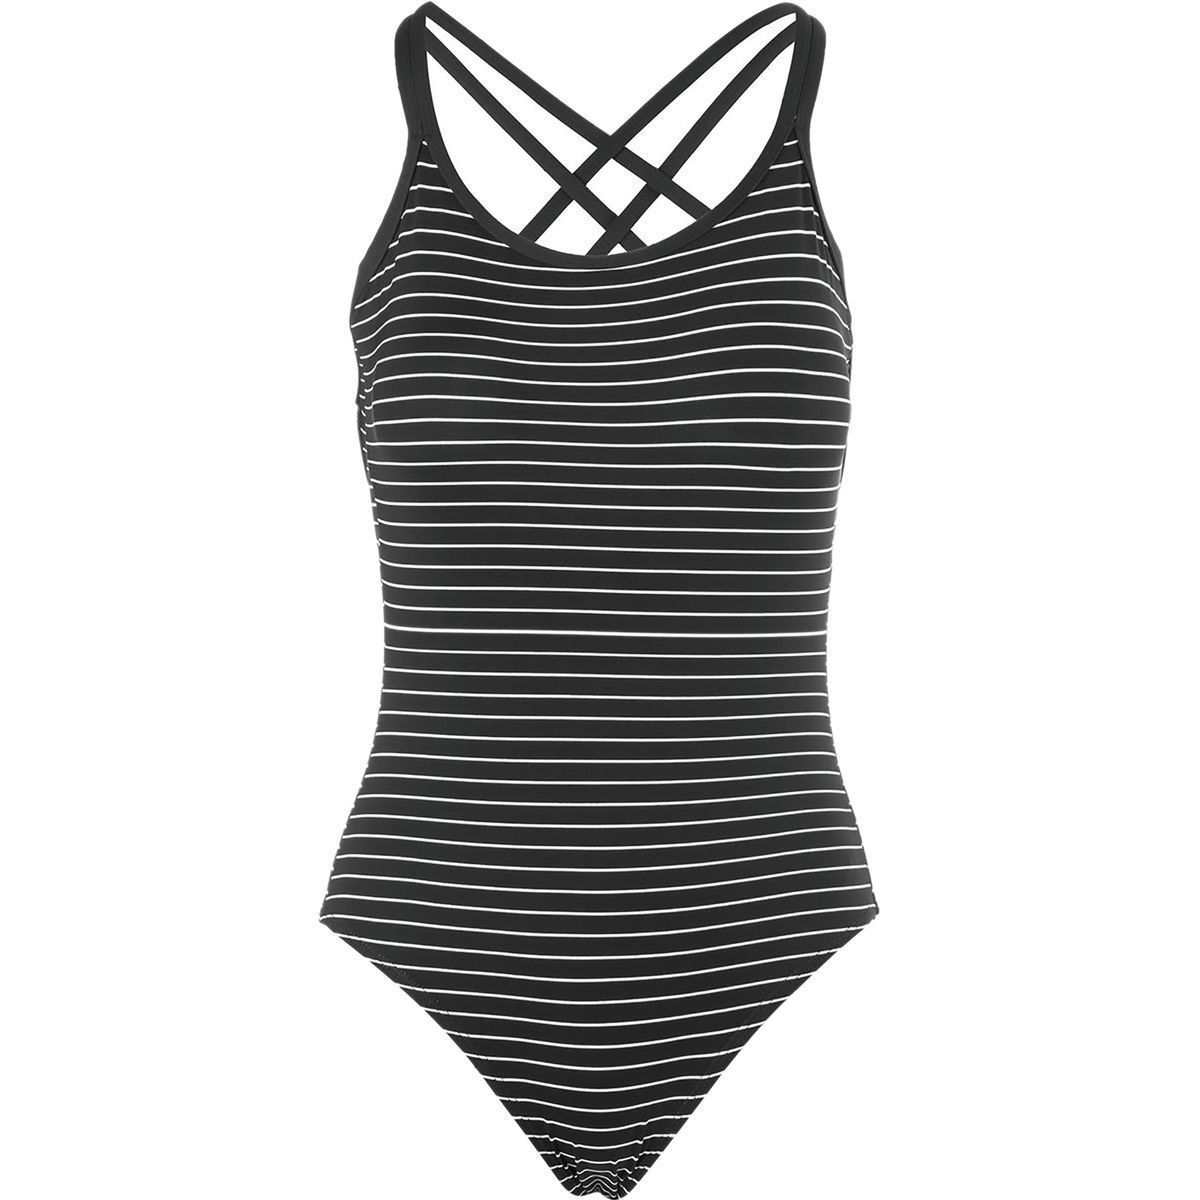 Carve Designs Beacon Full One Piece Swimsuit - Women's | Backcountry.com